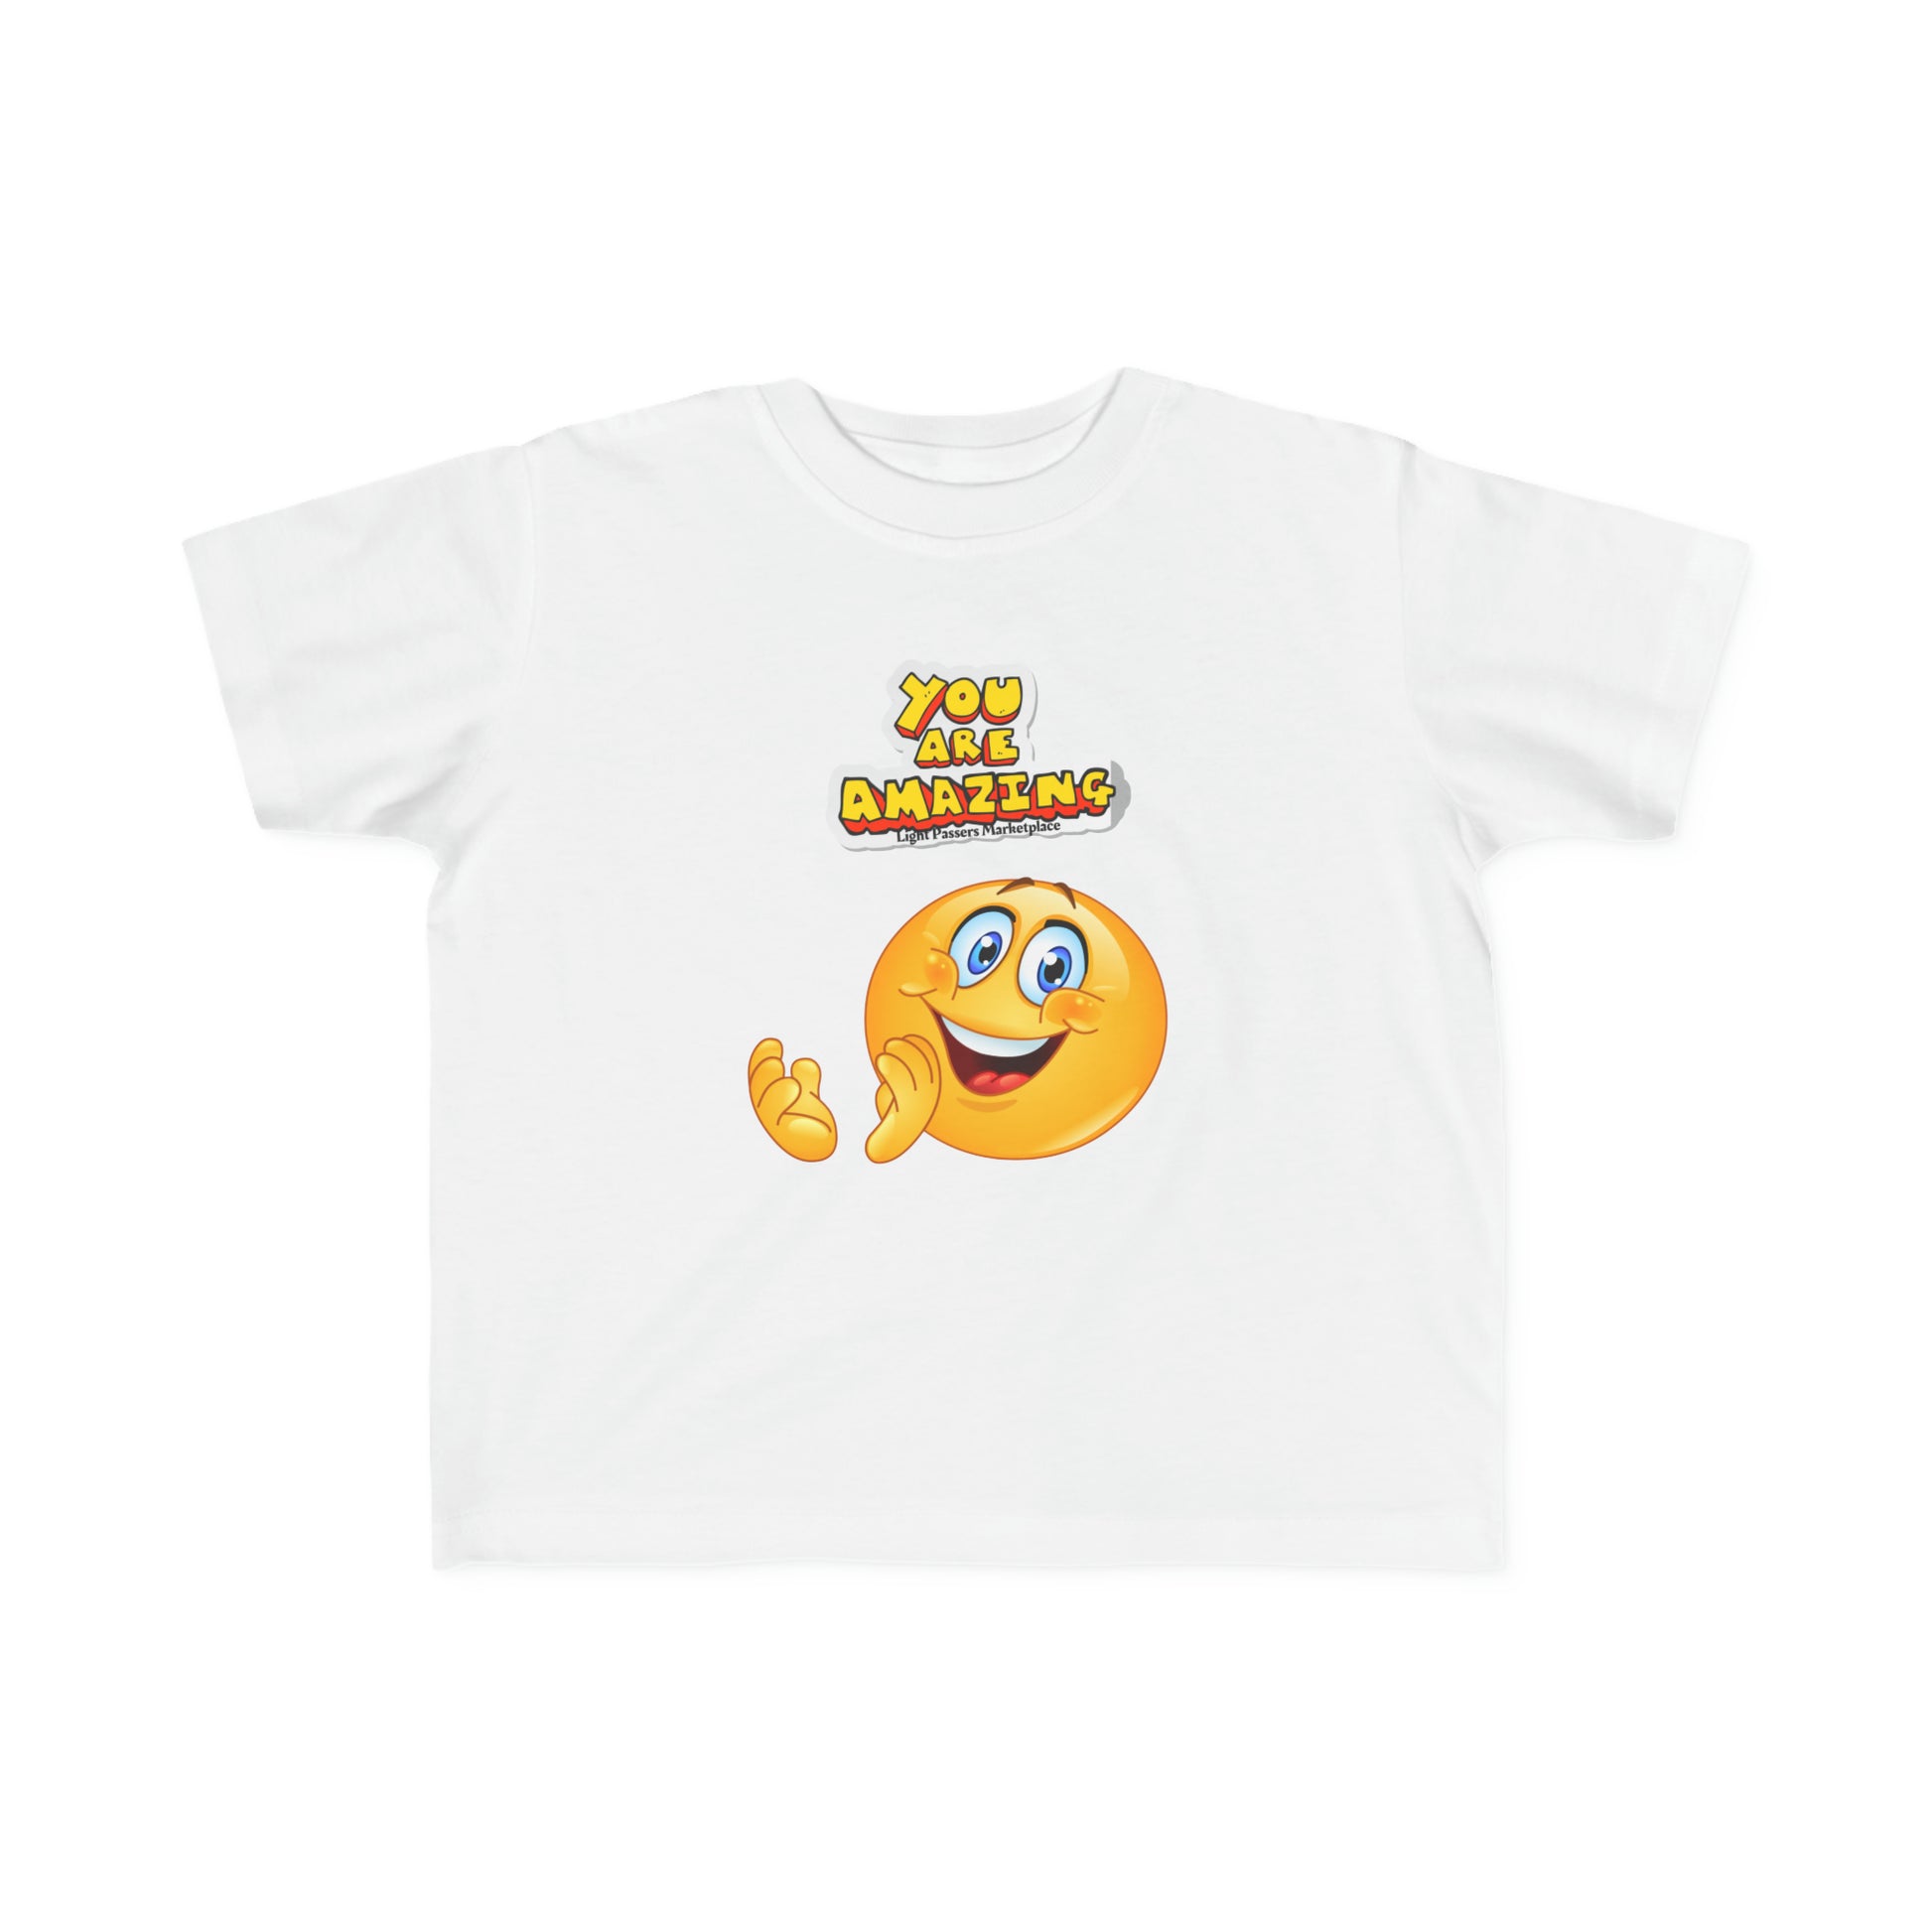 A white toddler t-shirt featuring a cartoon face and logo, made of soft 100% combed cotton. Durable print, light fabric, tear-away label, classic fit, true to size.